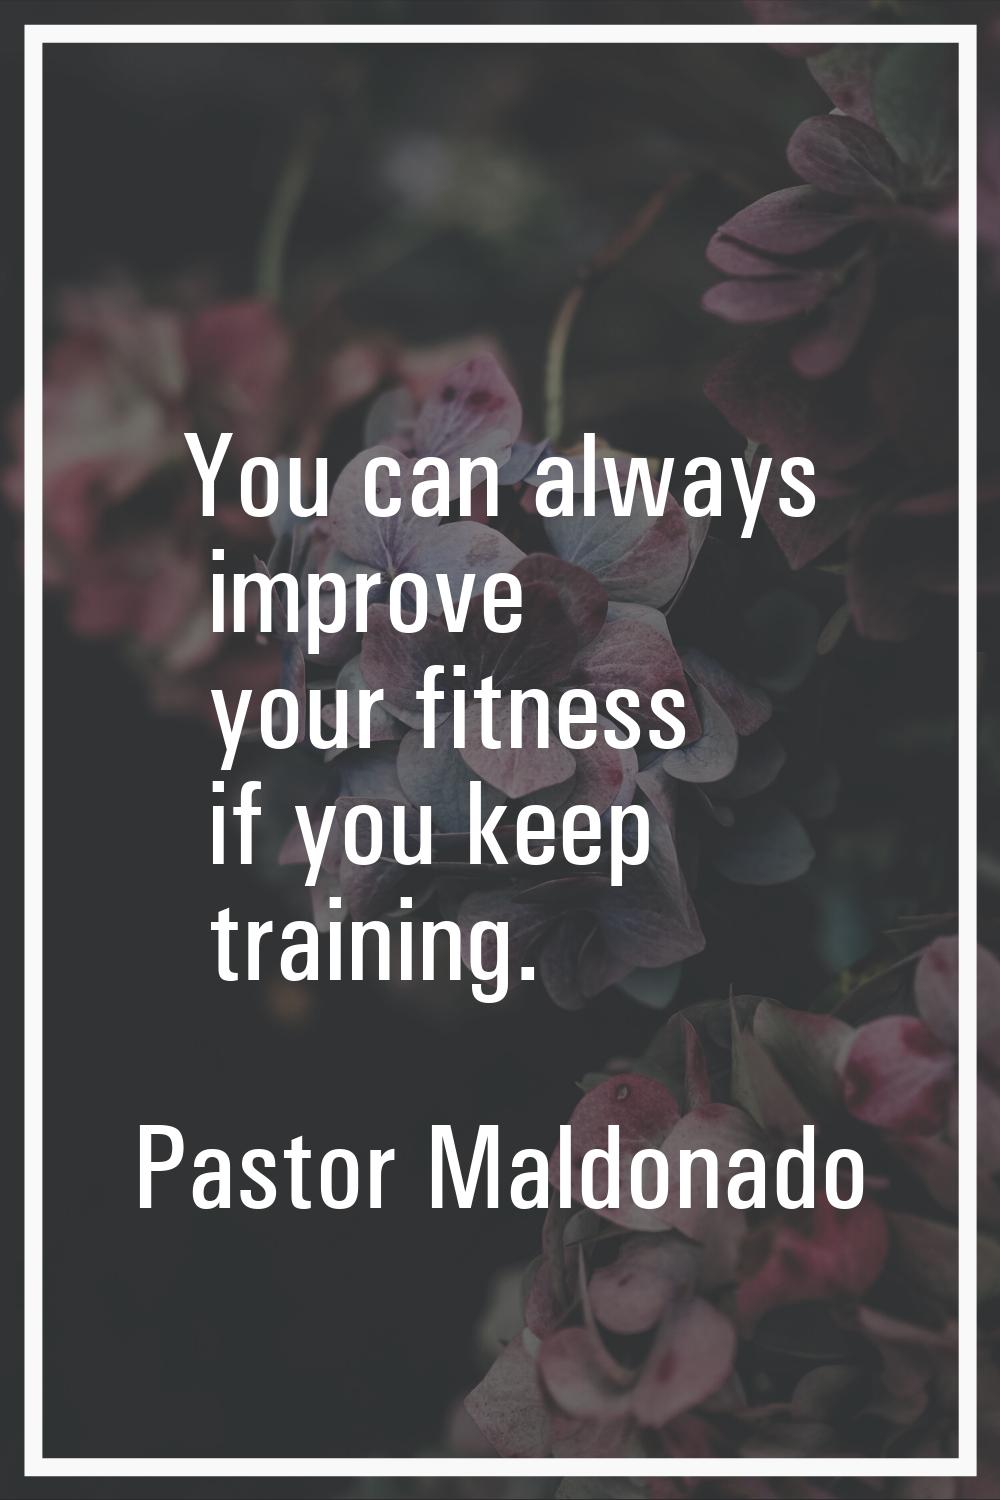 You can always improve your fitness if you keep training.